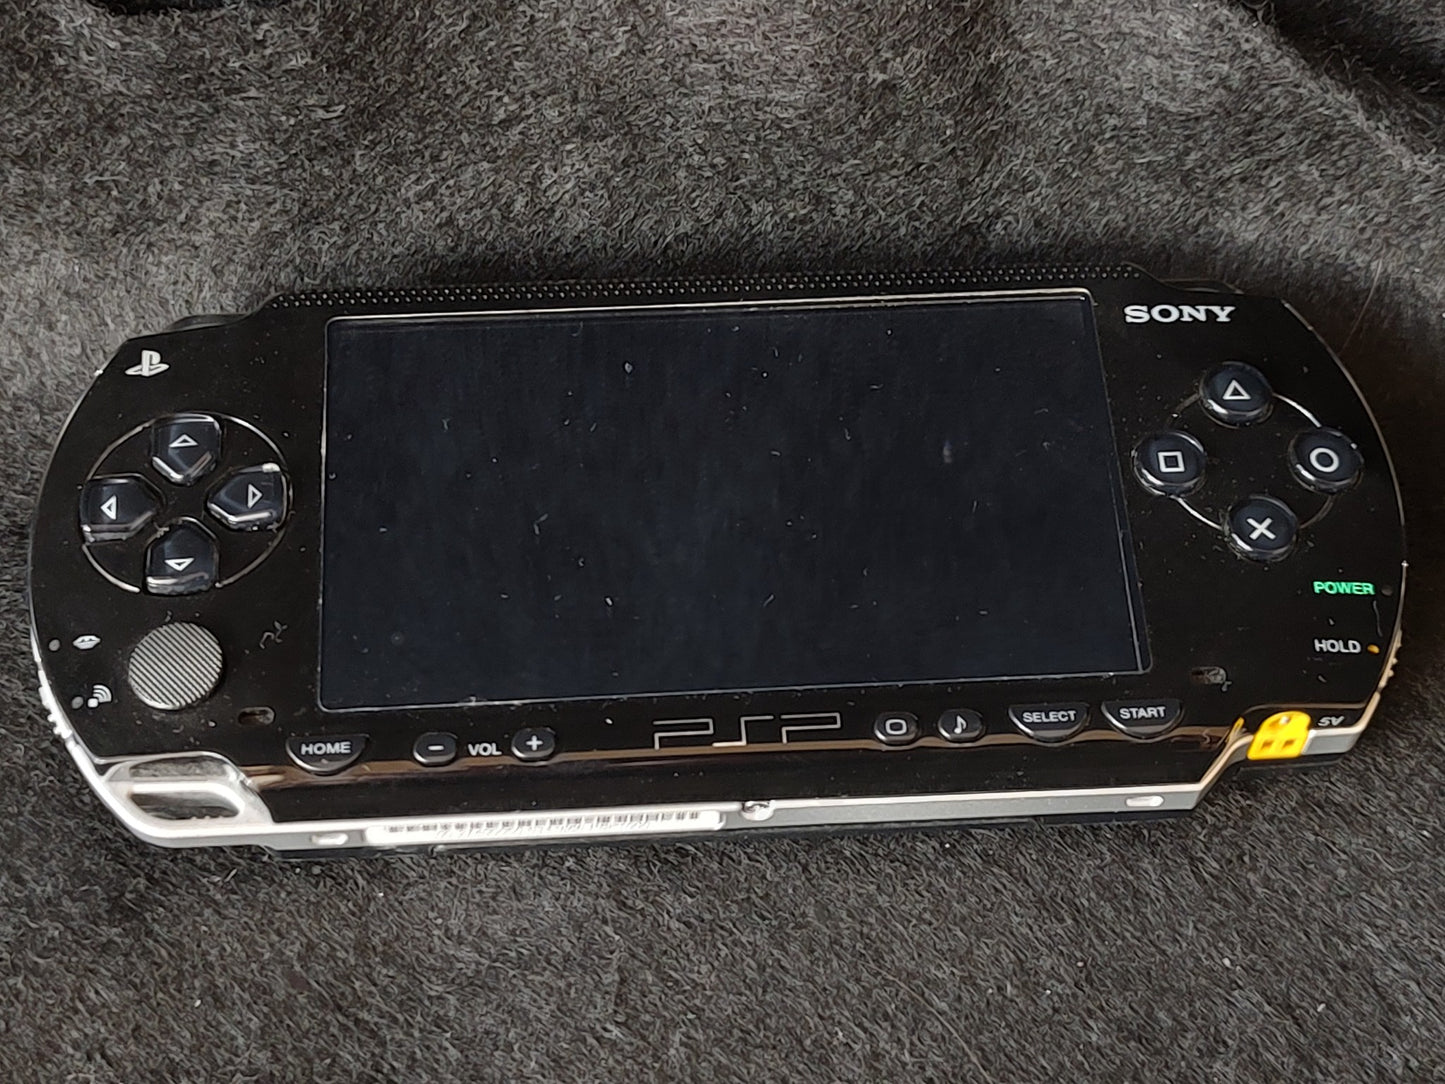 SONY PSP-1000 Console Piano Black color w/32M memory, Working, No-battery -g0130